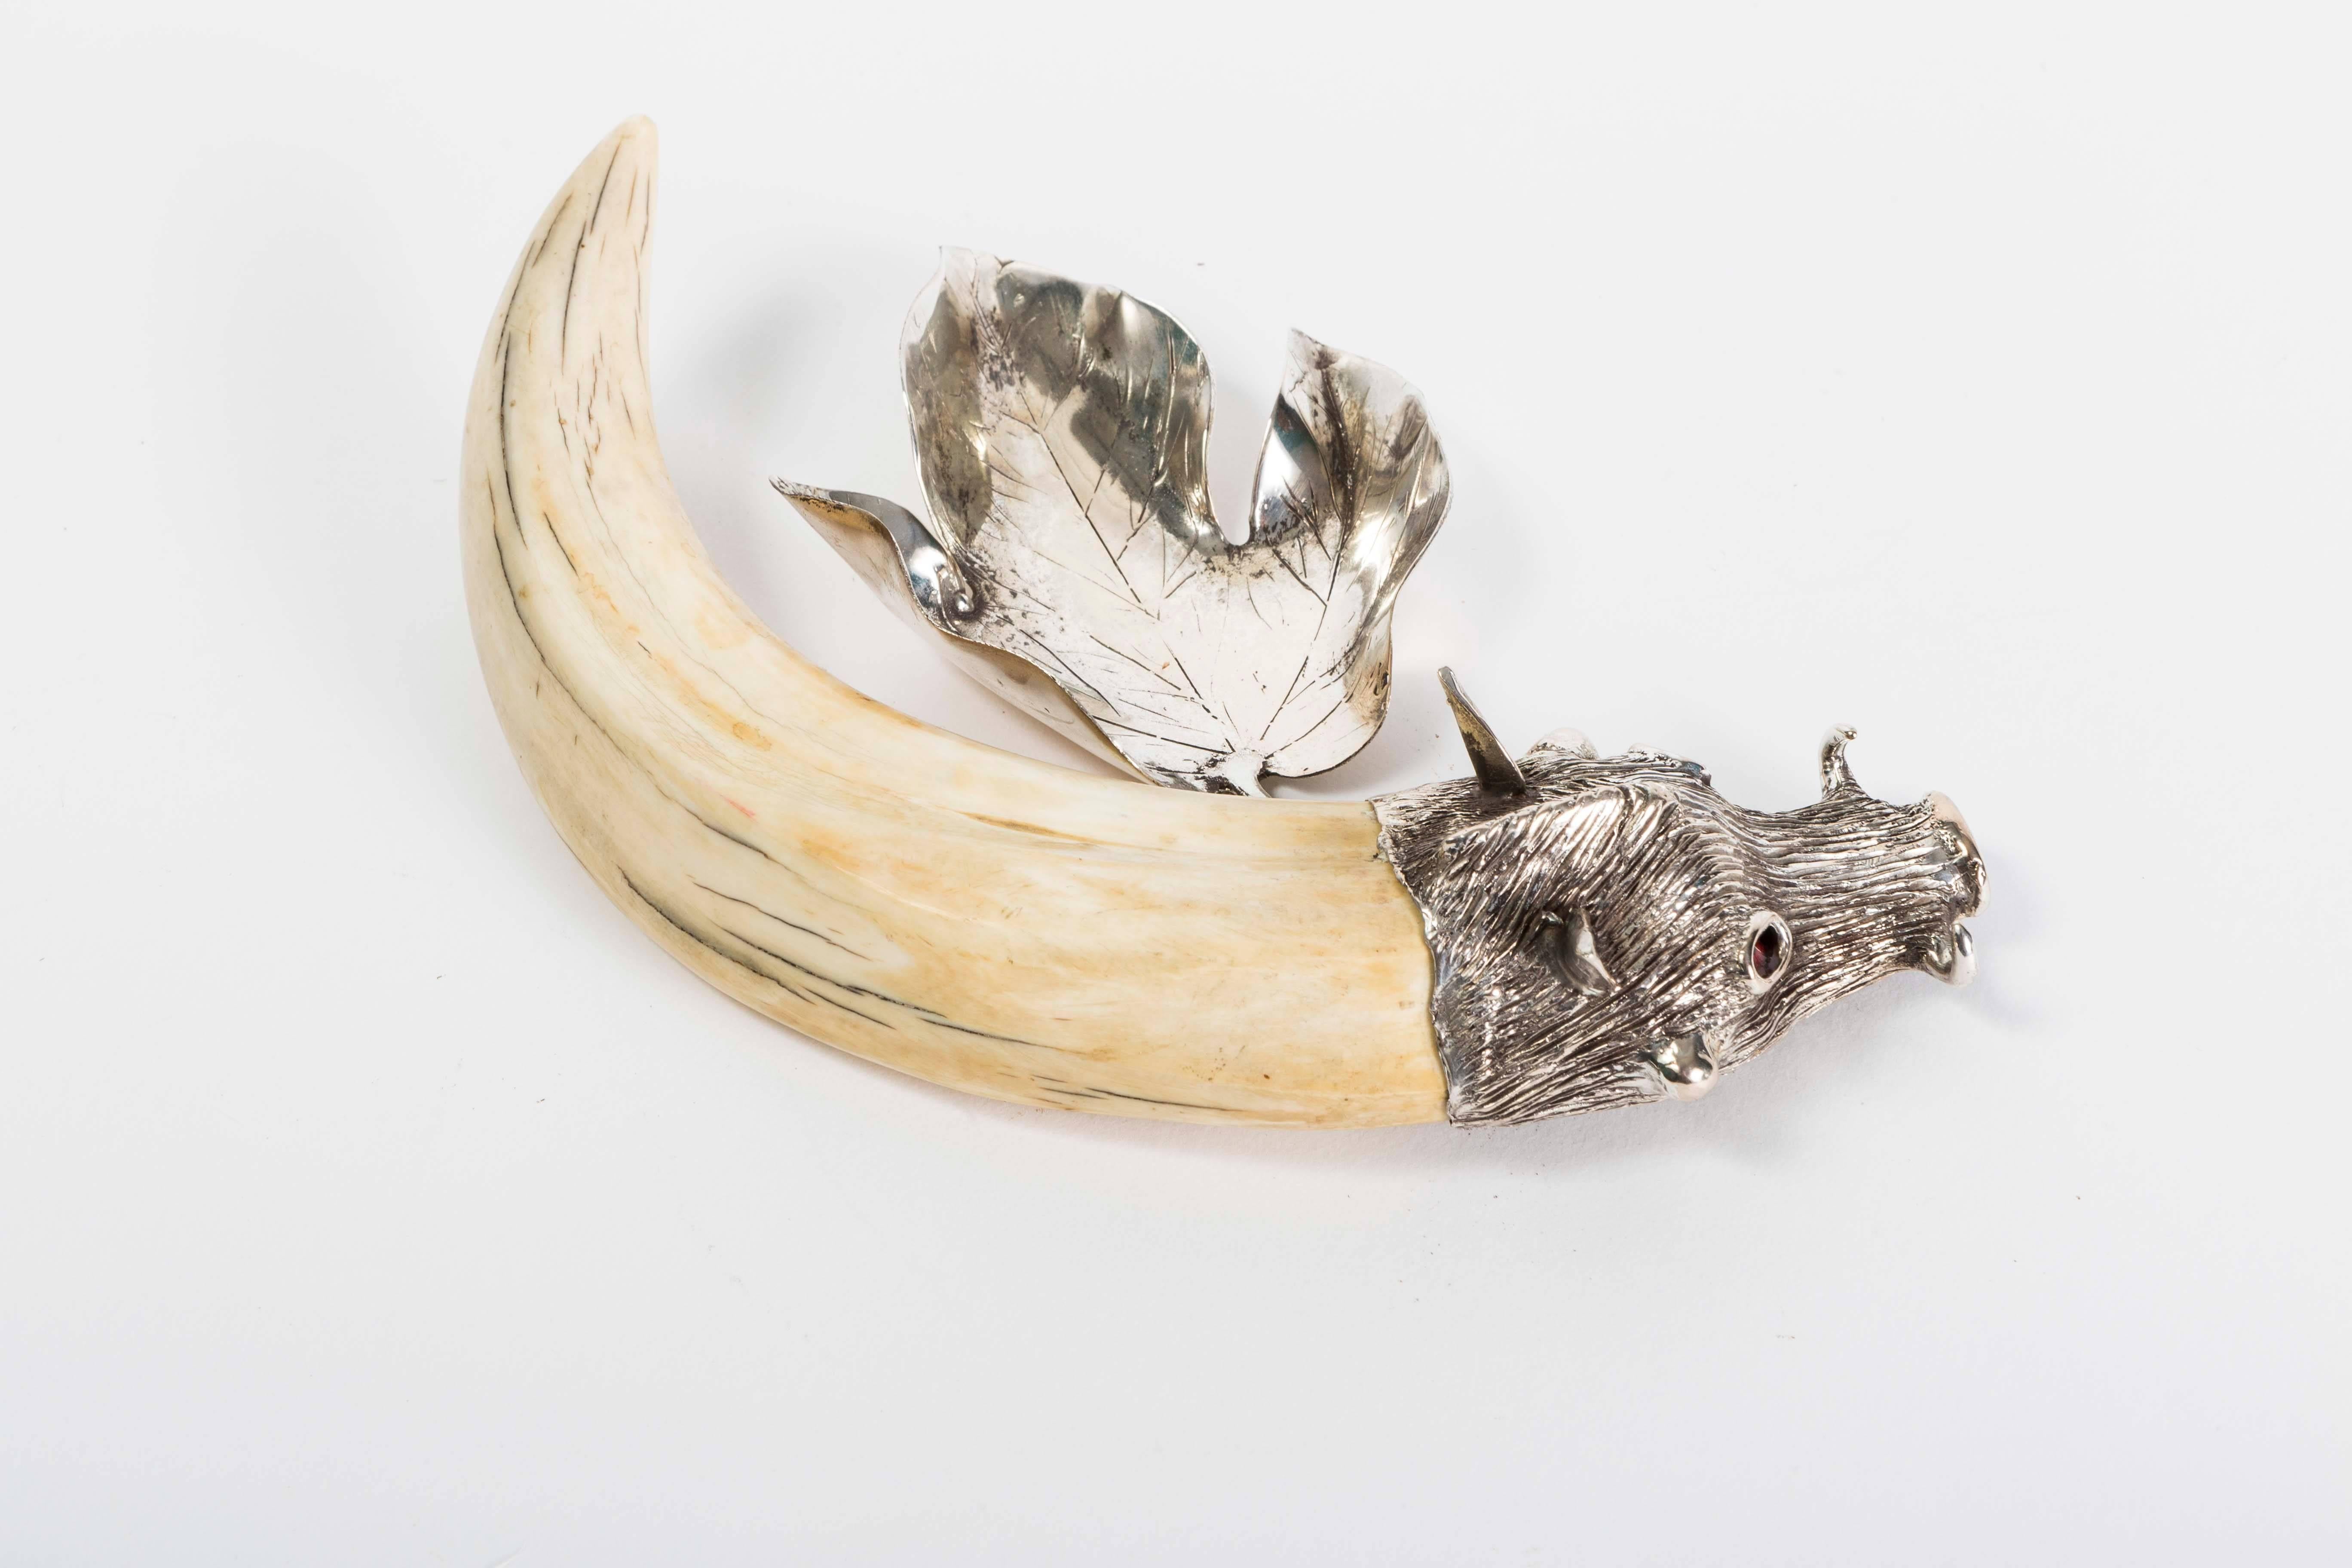 English Horn and Silver Leaf Cork Holder with Boar Head